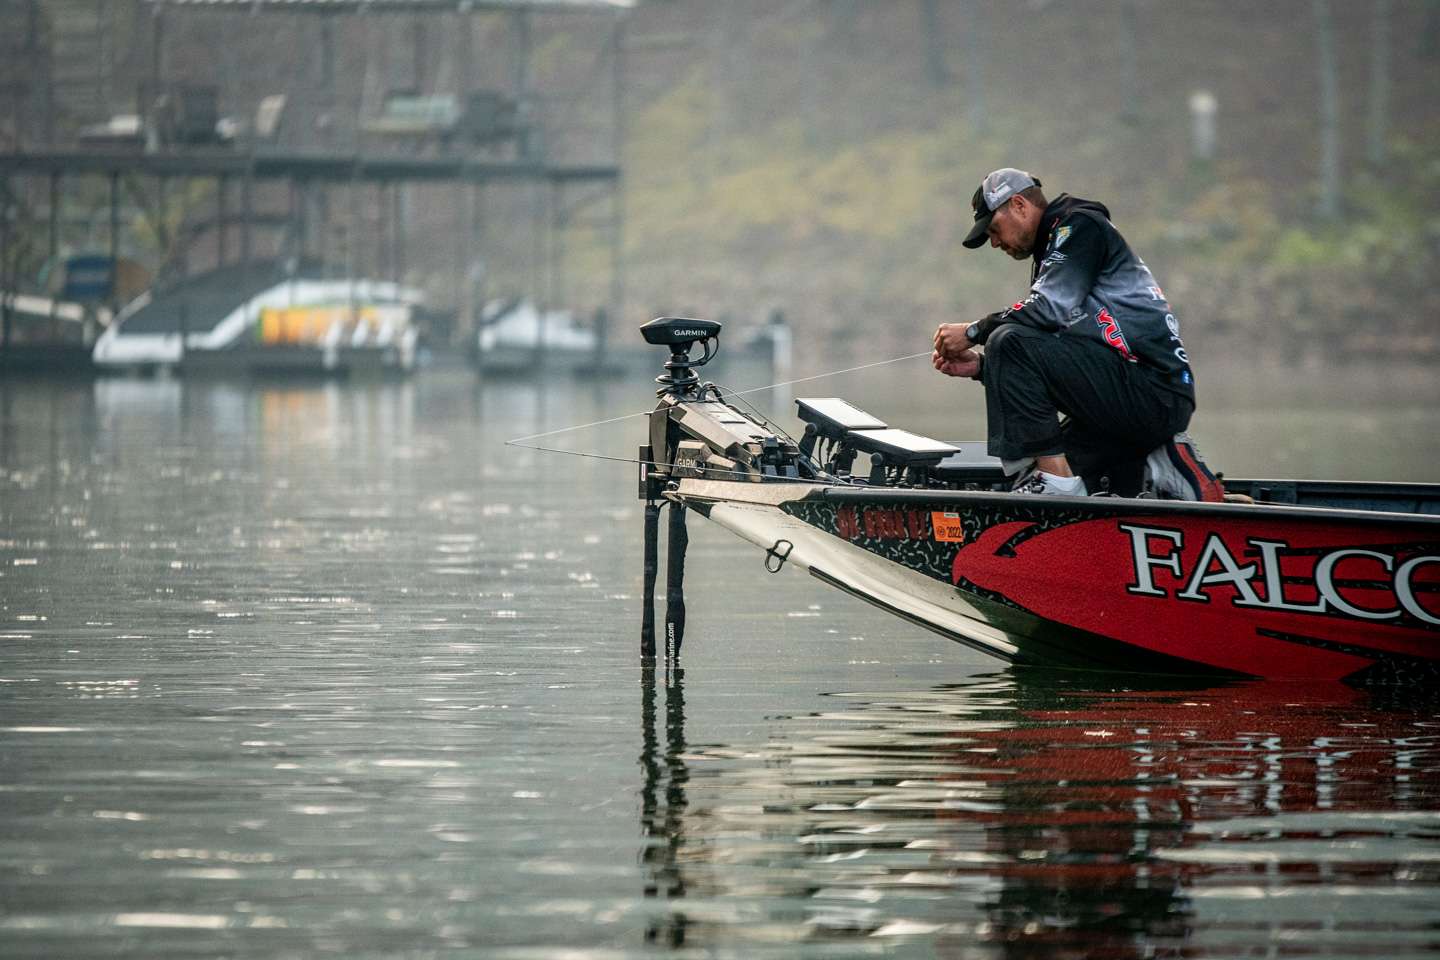 Watch Jason Christie attempt to seal a win on championship Sunday at the 2022 Academy Sports + Outdoors Bassmaster Classic presented by Huk. 